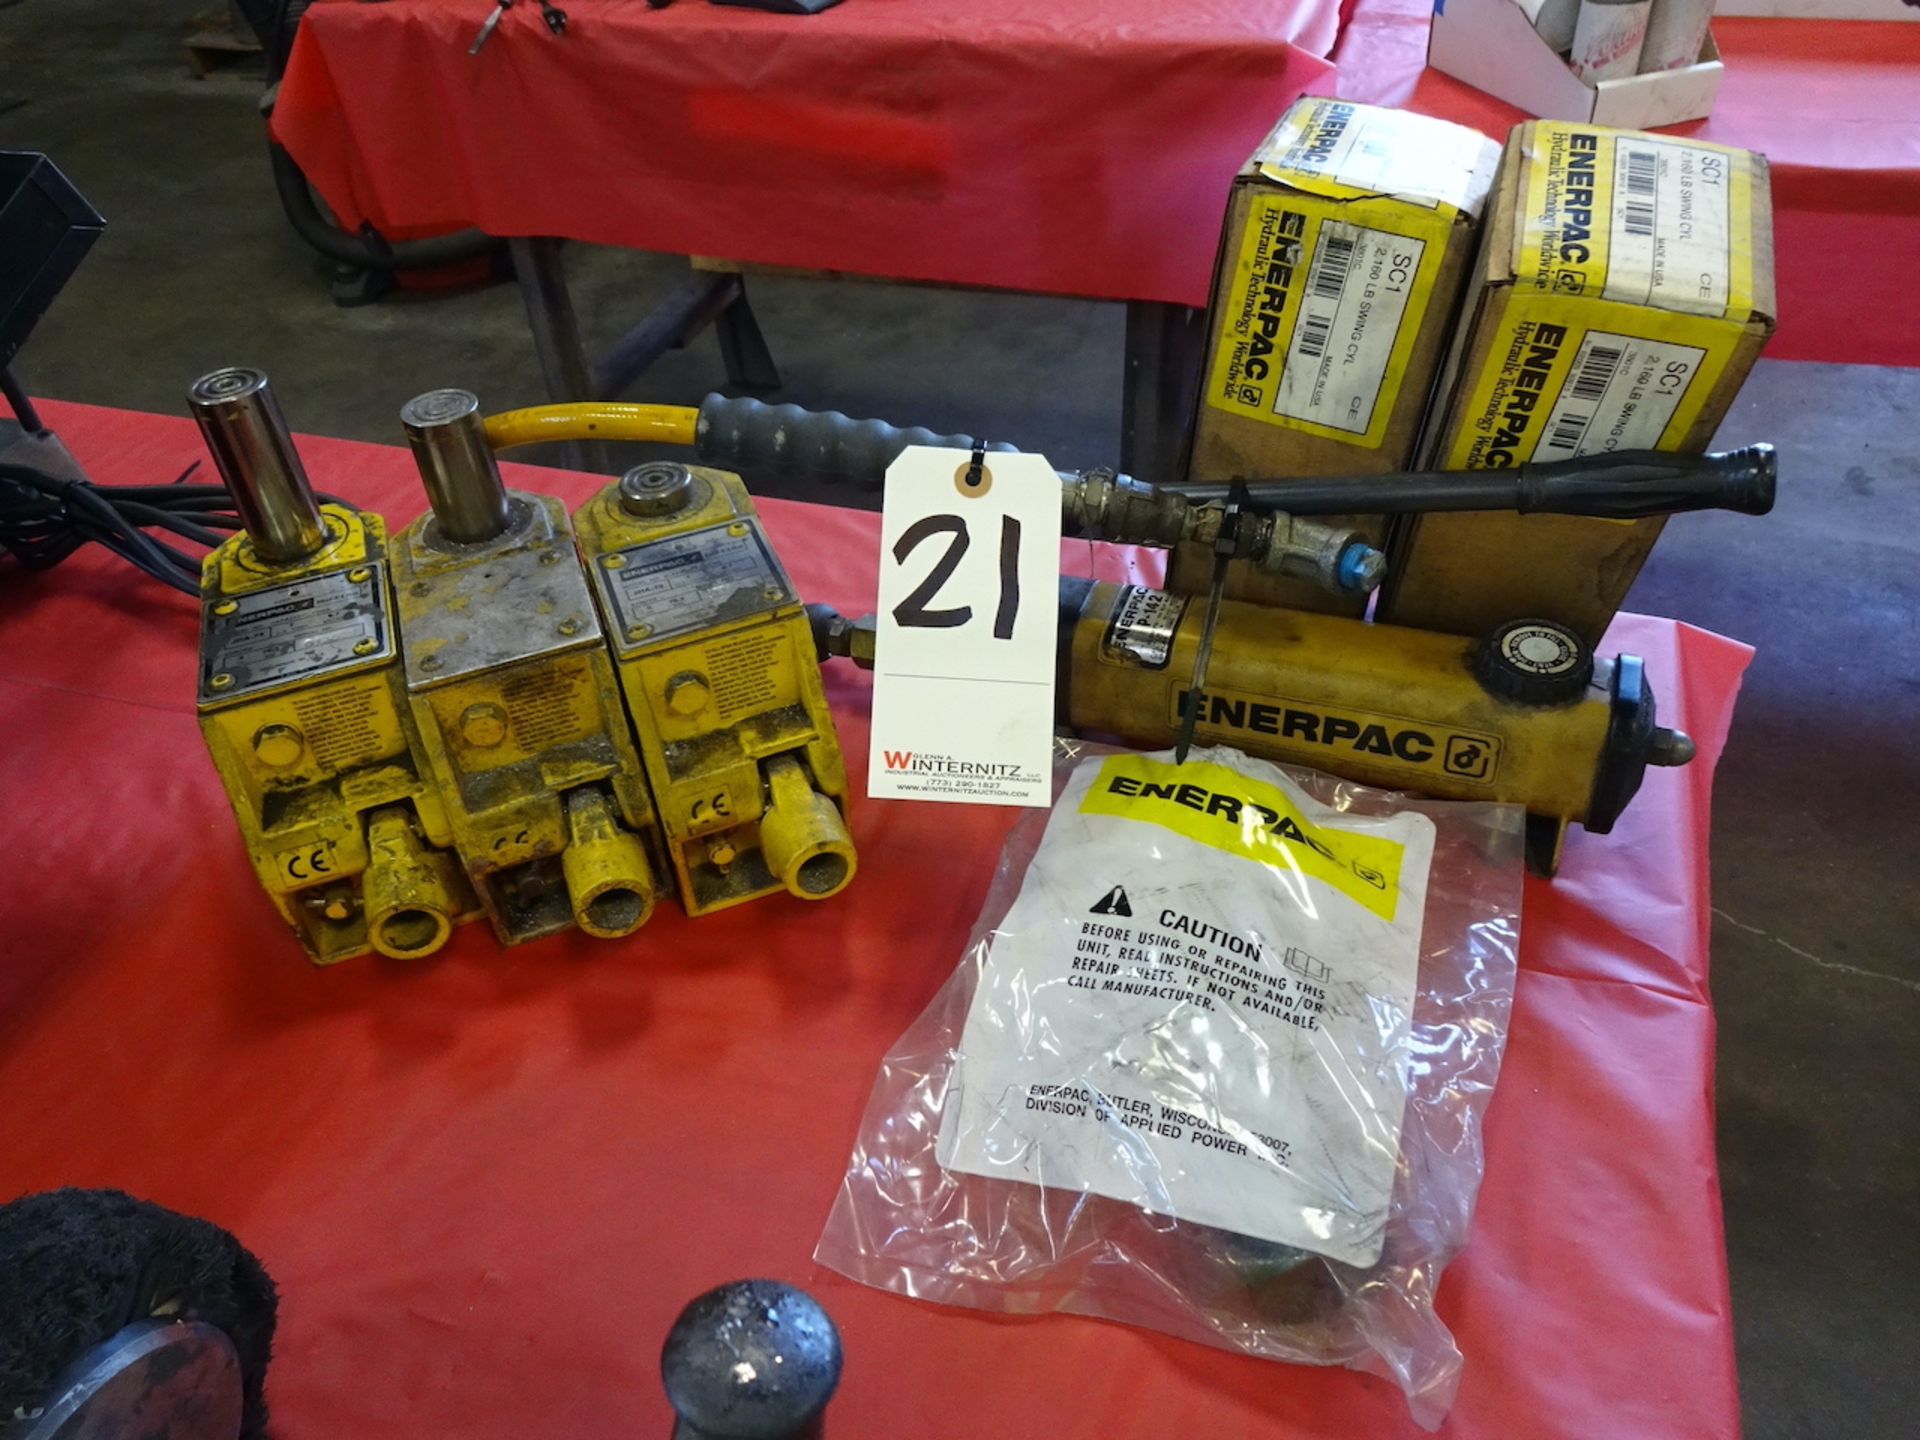 ENERPAC HYDRAULIC JACK SYSTEM WITH ENERPAC P-142 10,000 PSI CYLINDER & (3) ENERPAC MODEL JHA-73